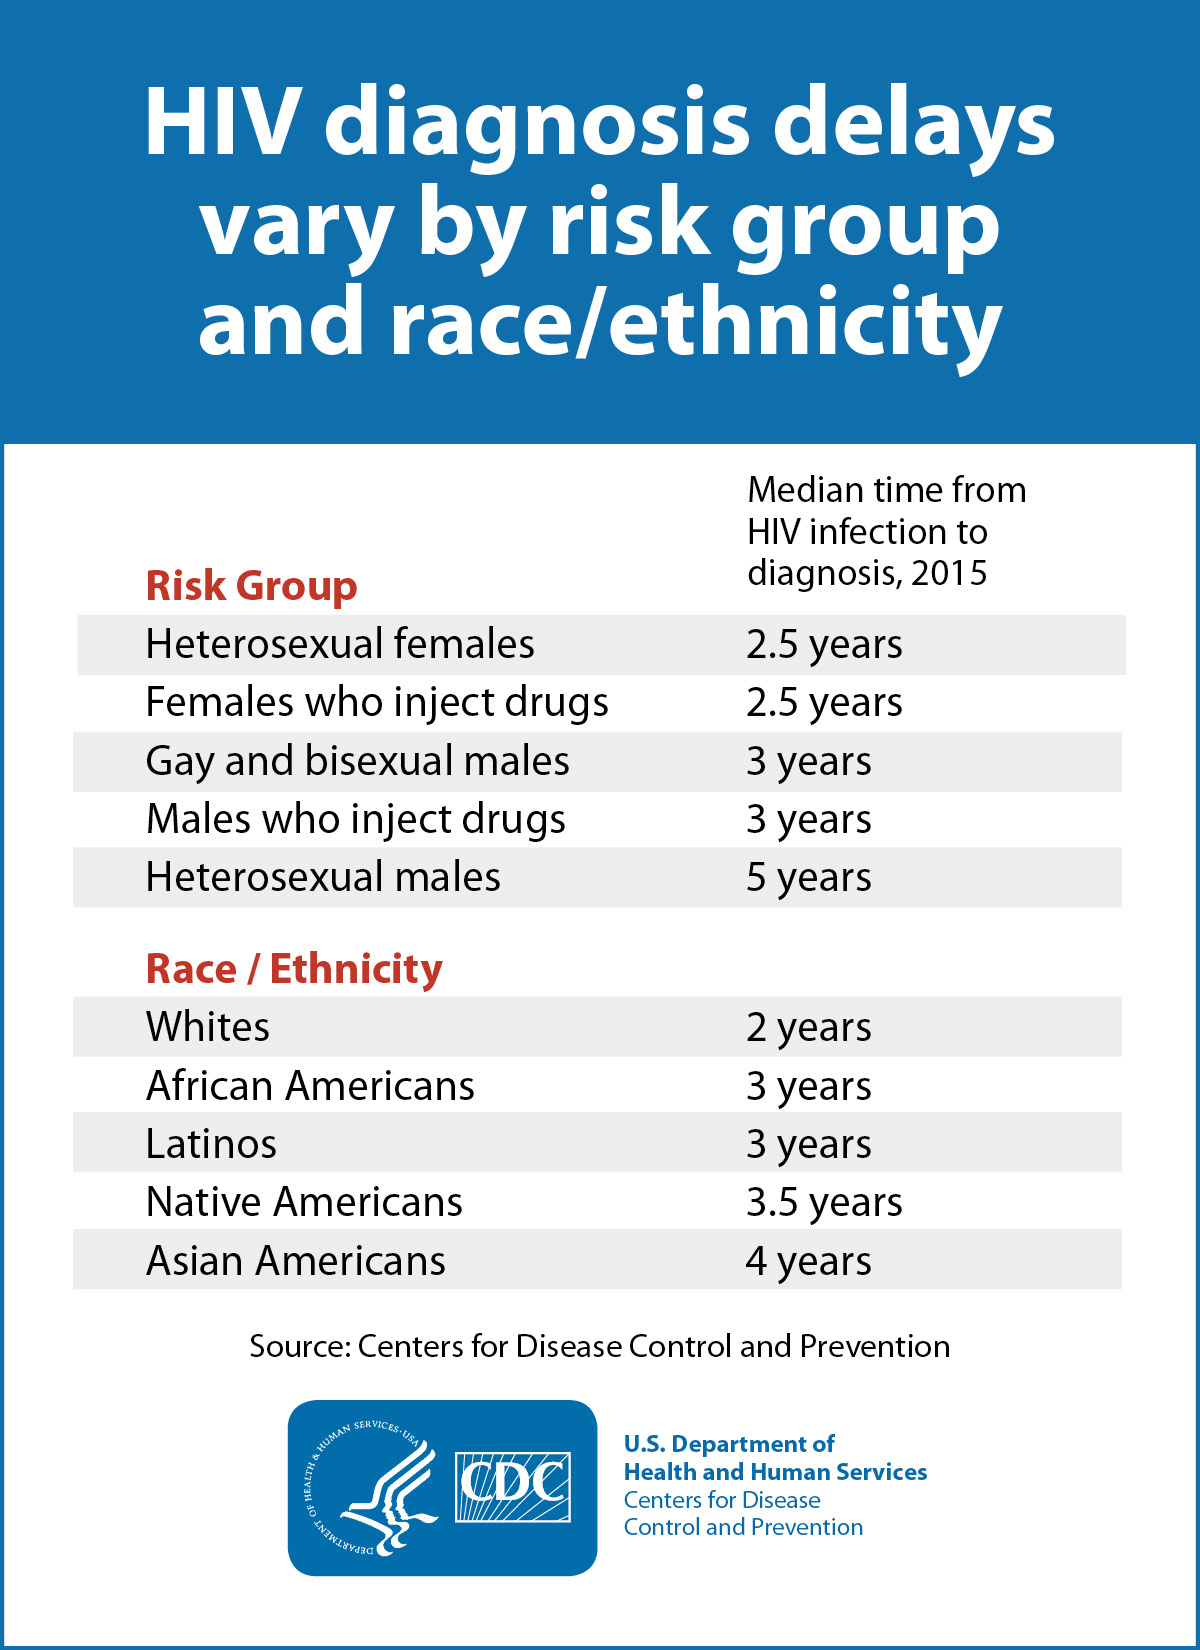 HIV diagnosis delays by risk group and race/ethnicity